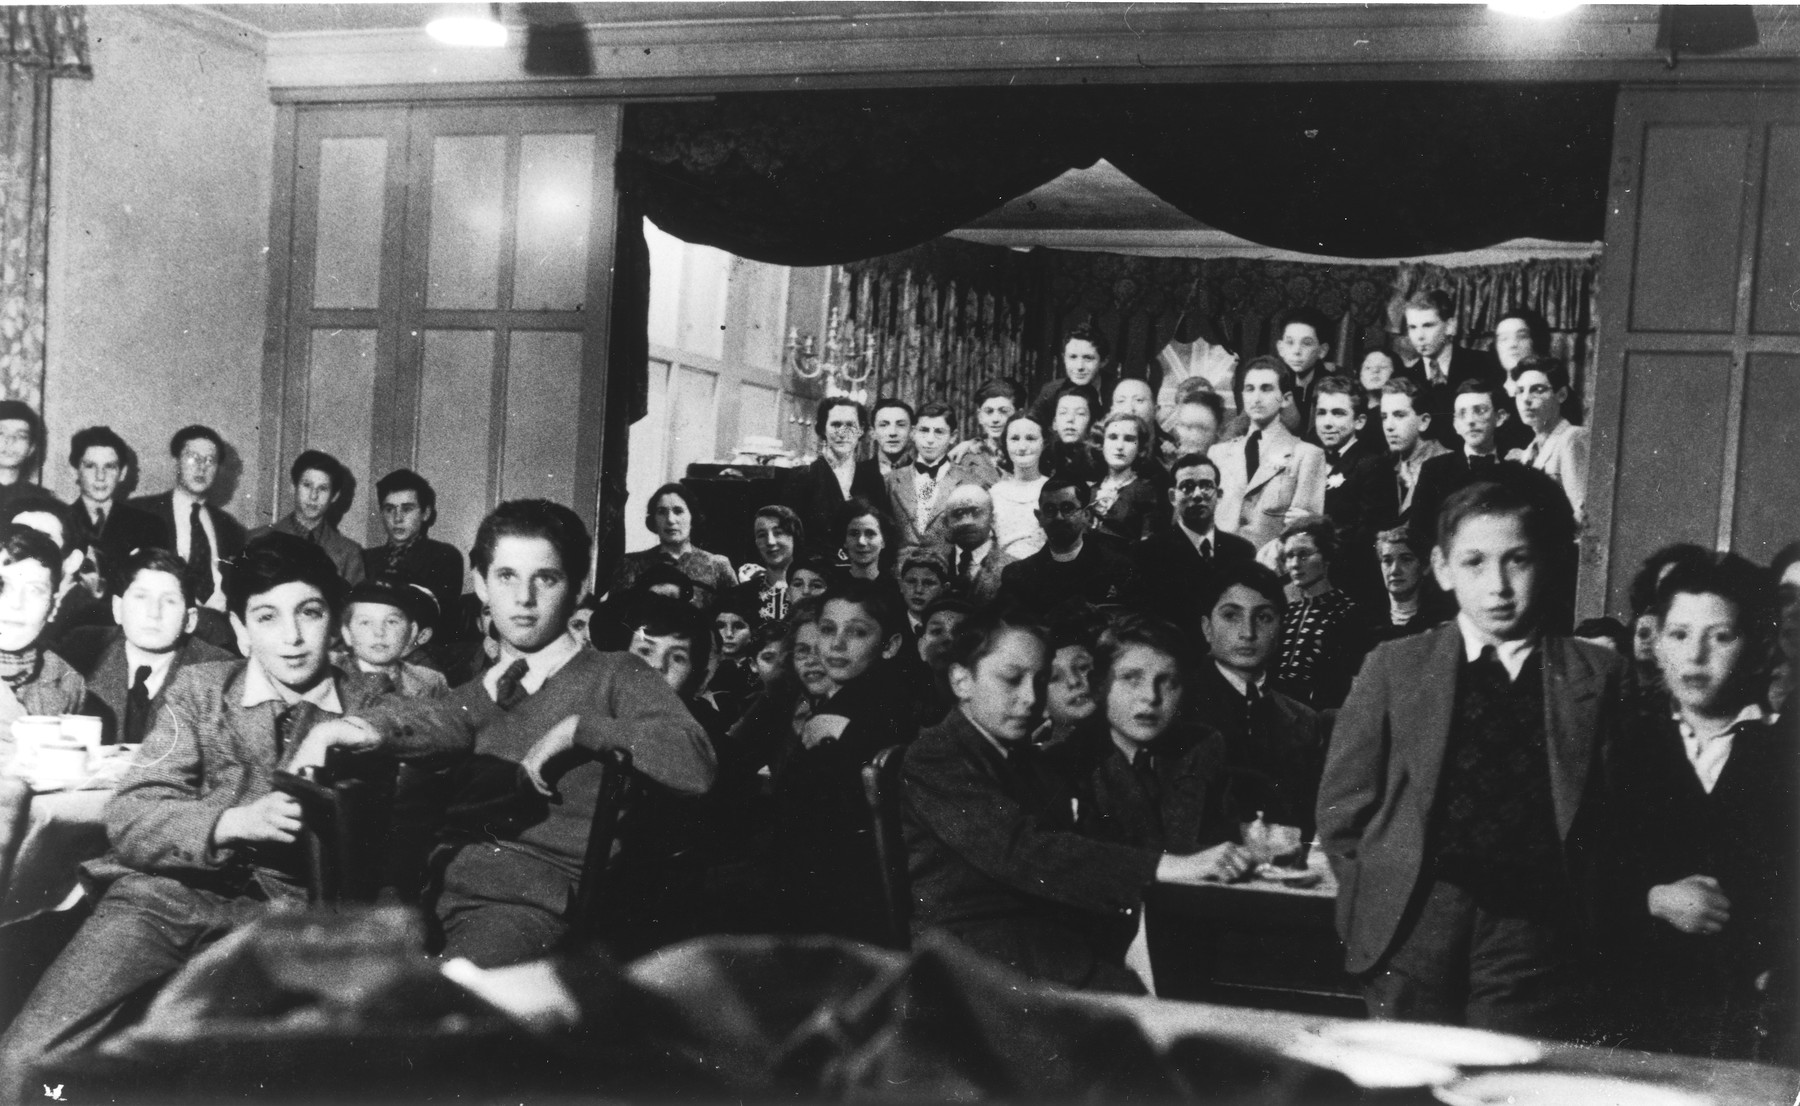 Jewish children from the Rowden Hall School attend a Hannukah party in an overflow hostel on Harold Road.

Among those pictured are Guenther Cahn, his brother Helmuth Cahn (later Harry Curtis), Eric Hamburger, Kurt Berger ( a teacher recruited from the internees in the Kitchener Camp), Mr. and Mrs. Katz and Mrs. Bergel.